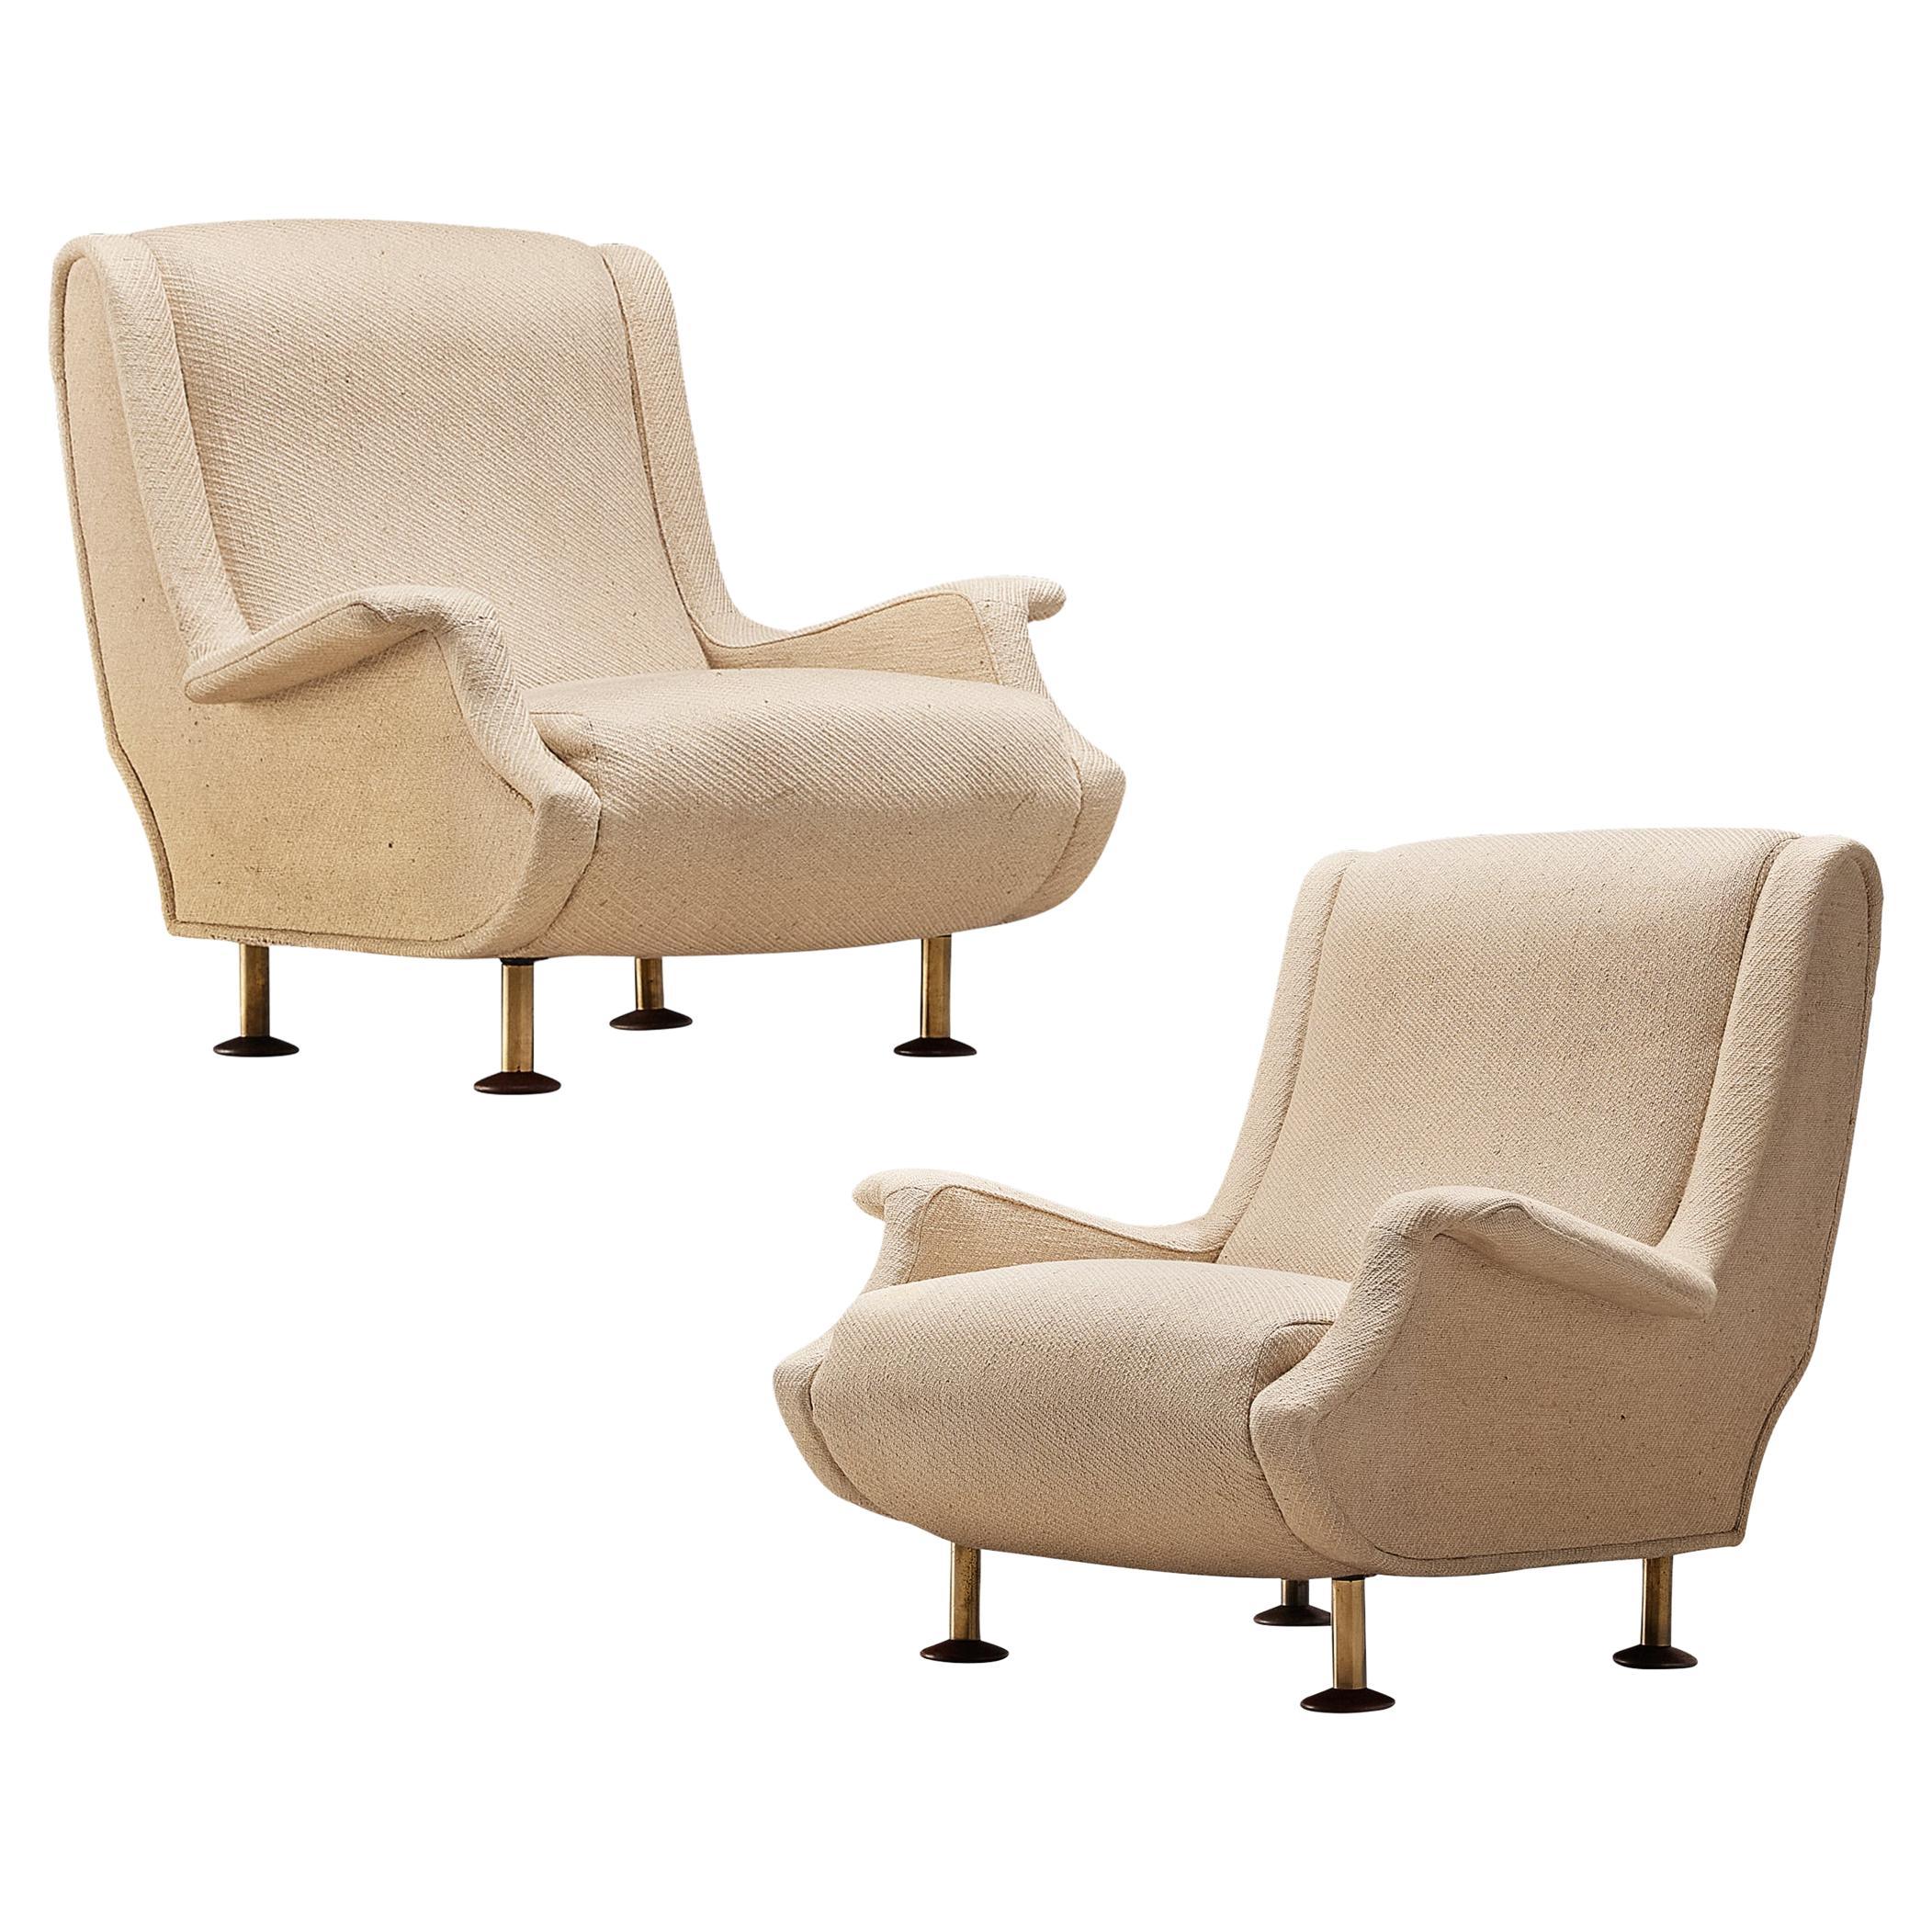 Marco Zanuso for Arflex 'Regent' Pair of Lounge Chairs in Off-White Upholstery